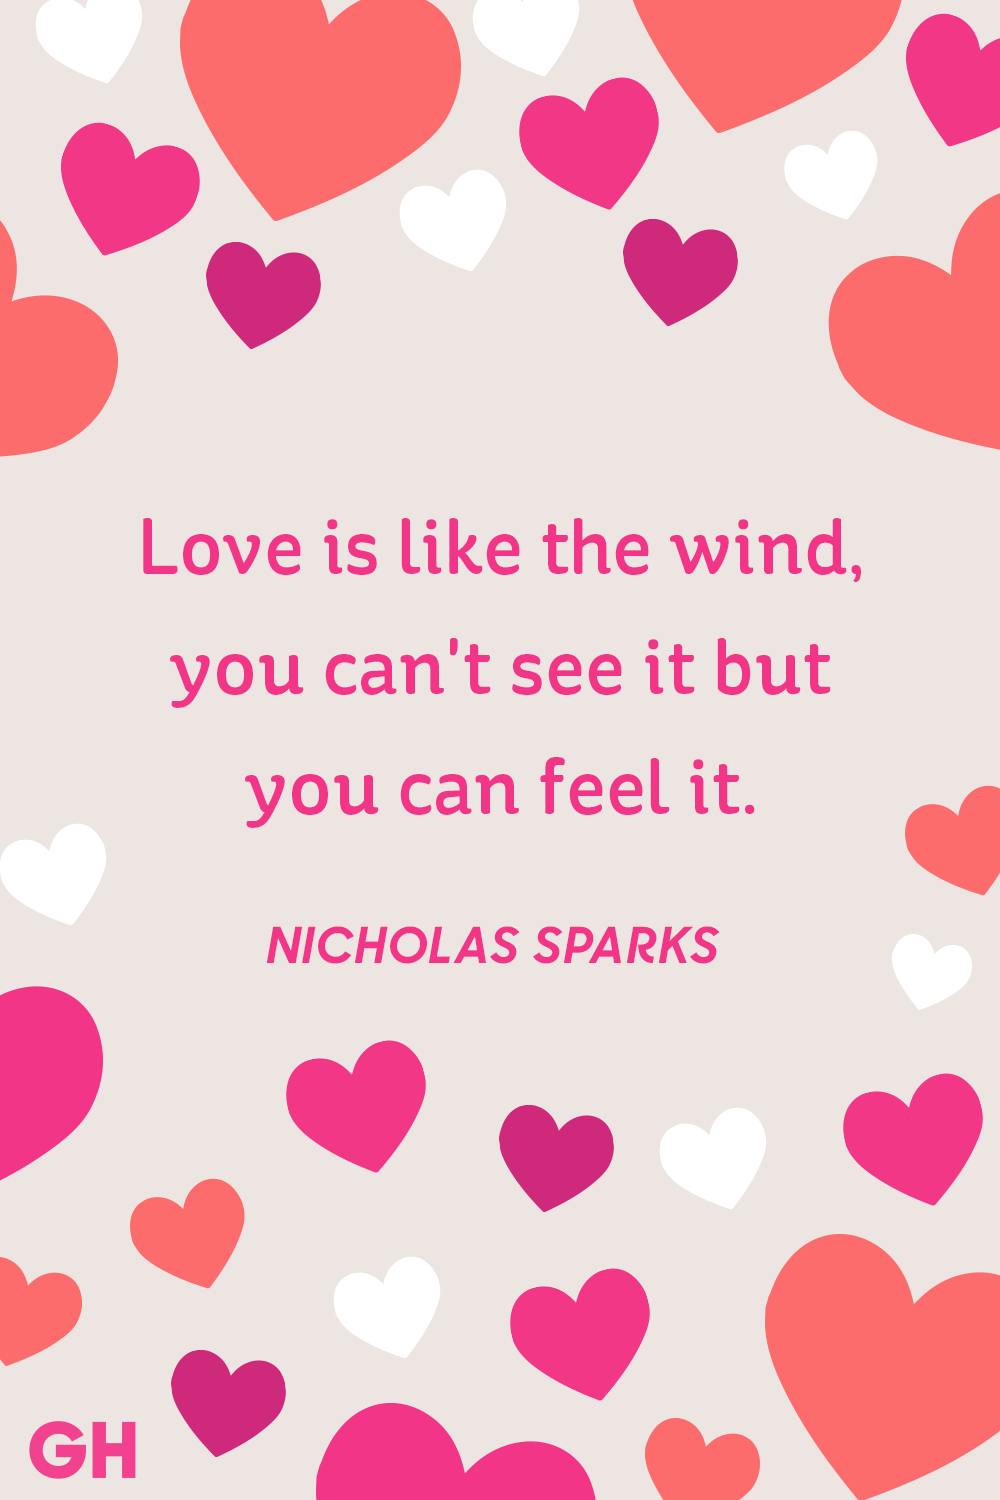 35 Cute Valentine's Day Quotes - Best Romantic Quotes About